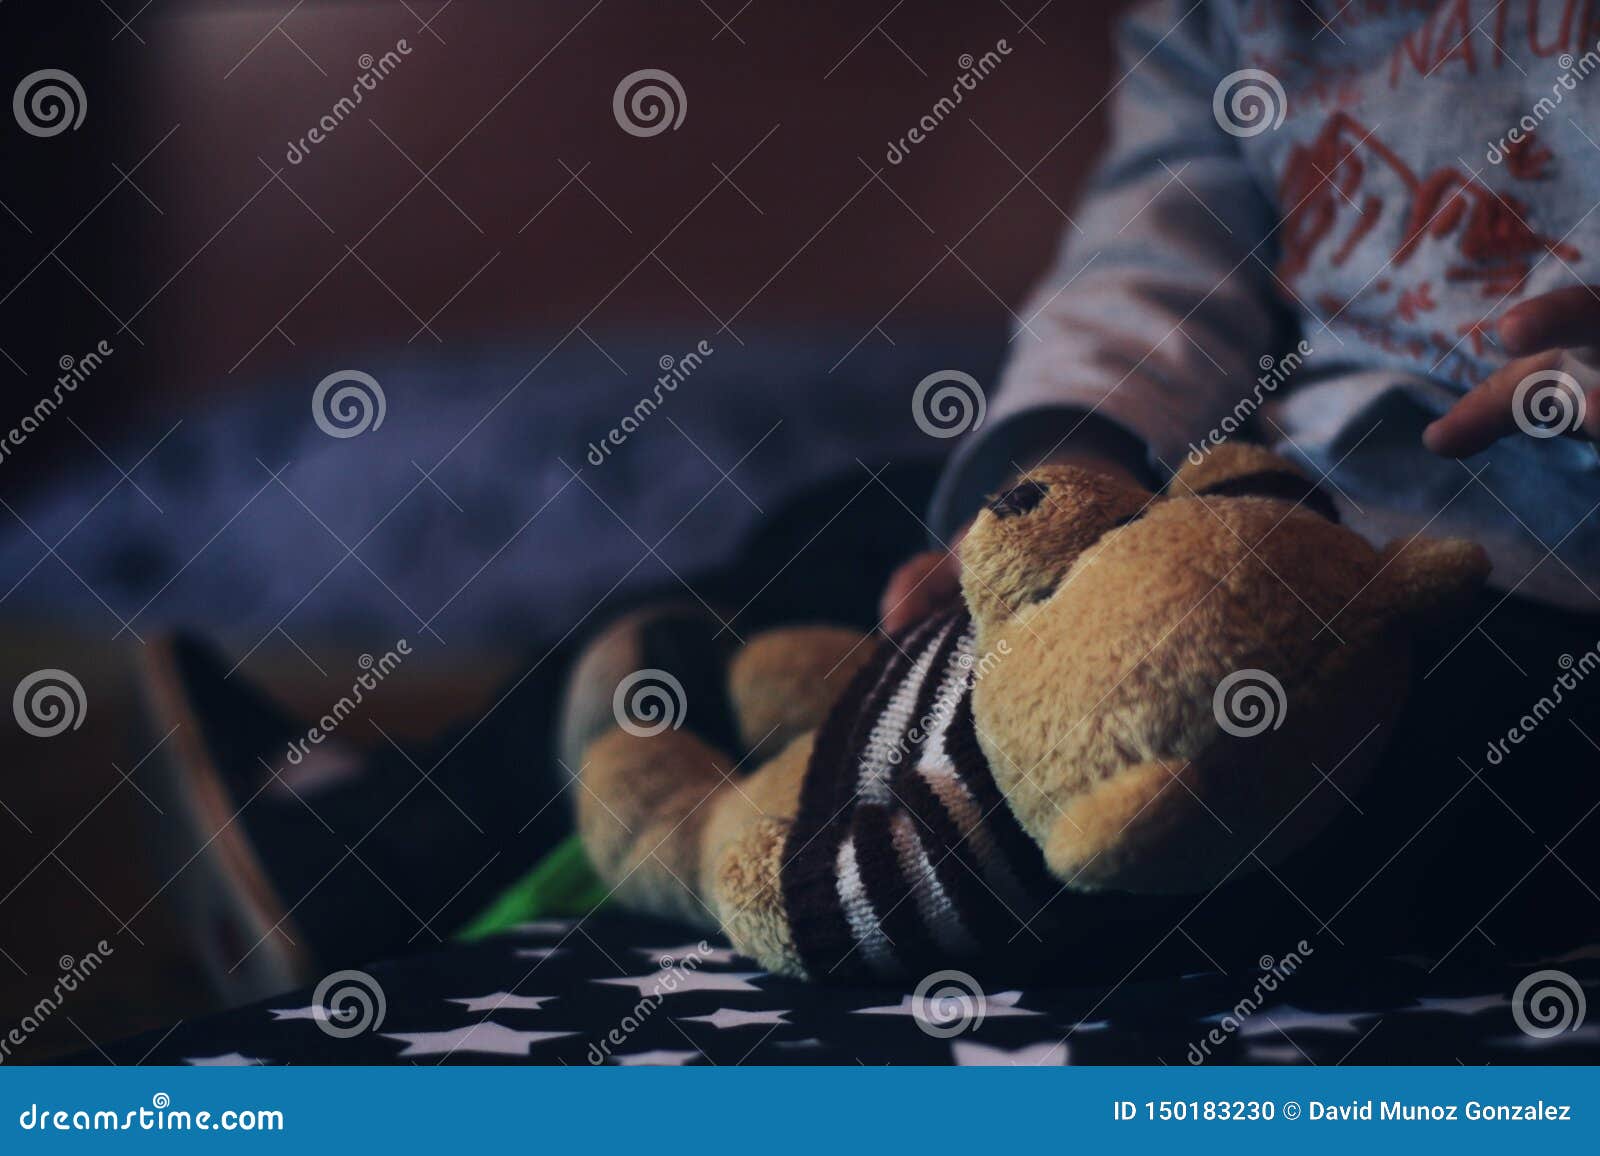 baby playing with a teddy bear.